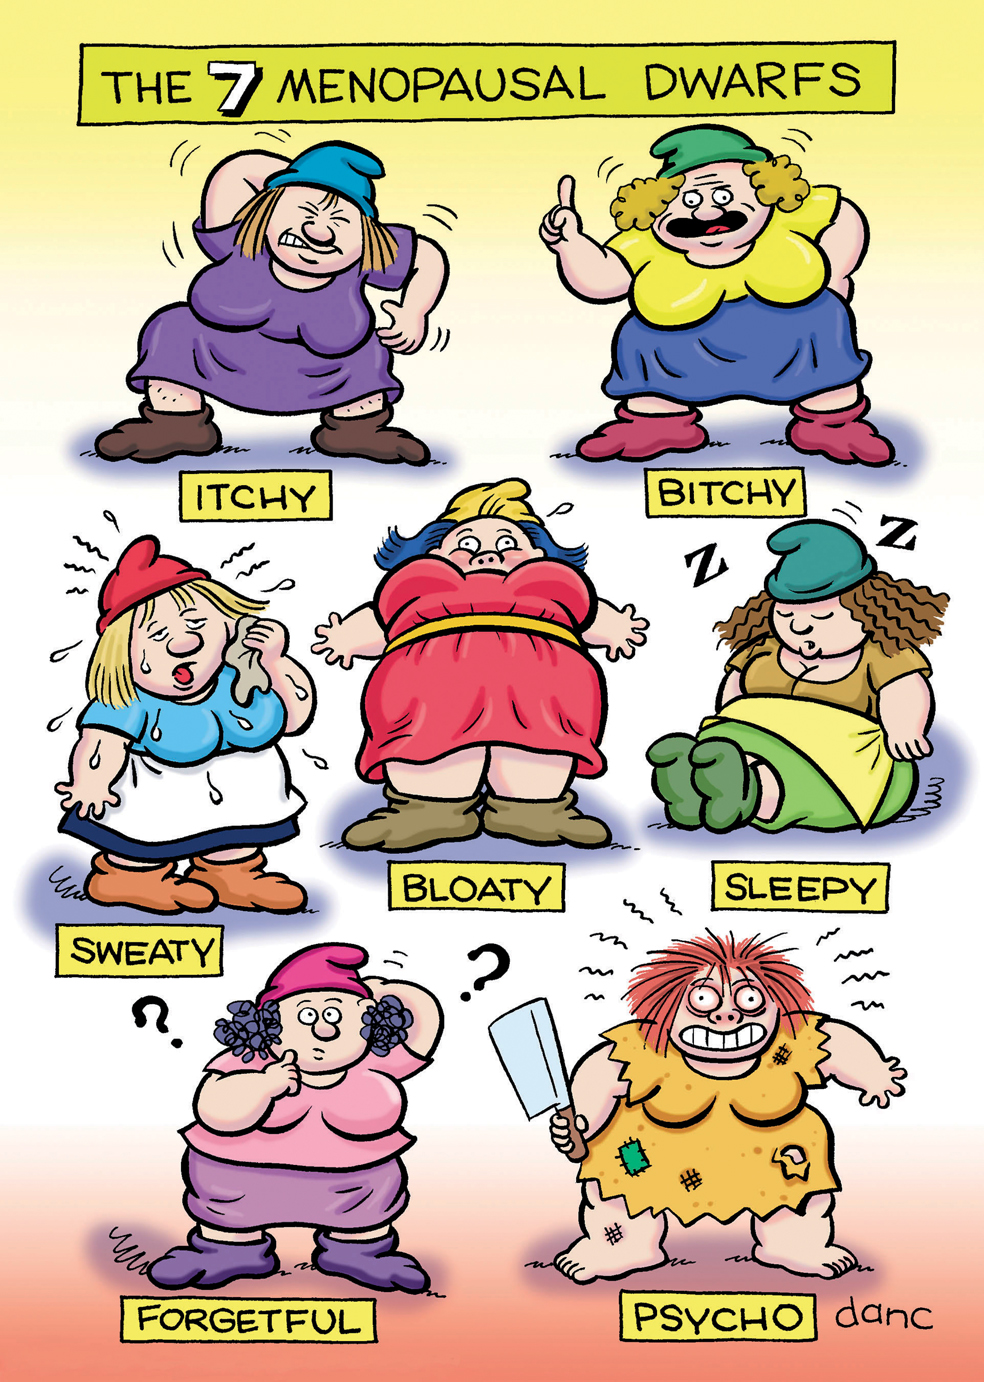 Who are the seven dwarfs of menopause? 